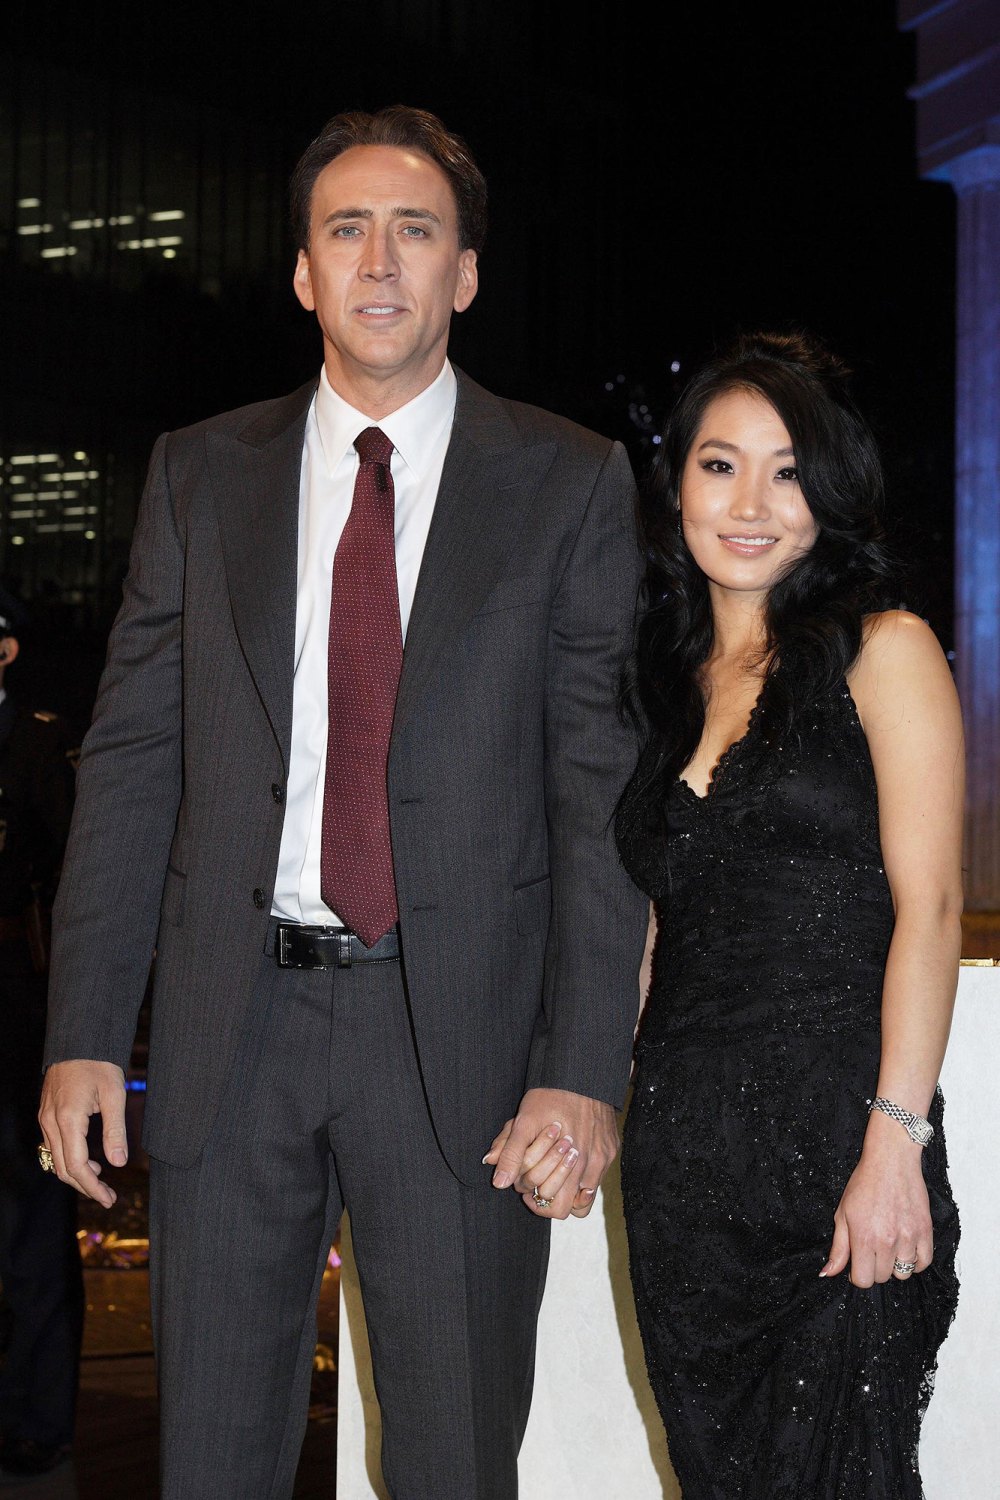 Nicolas Cage, Wife Alice Kim Are Separated After 12 Years, Rep Confirms